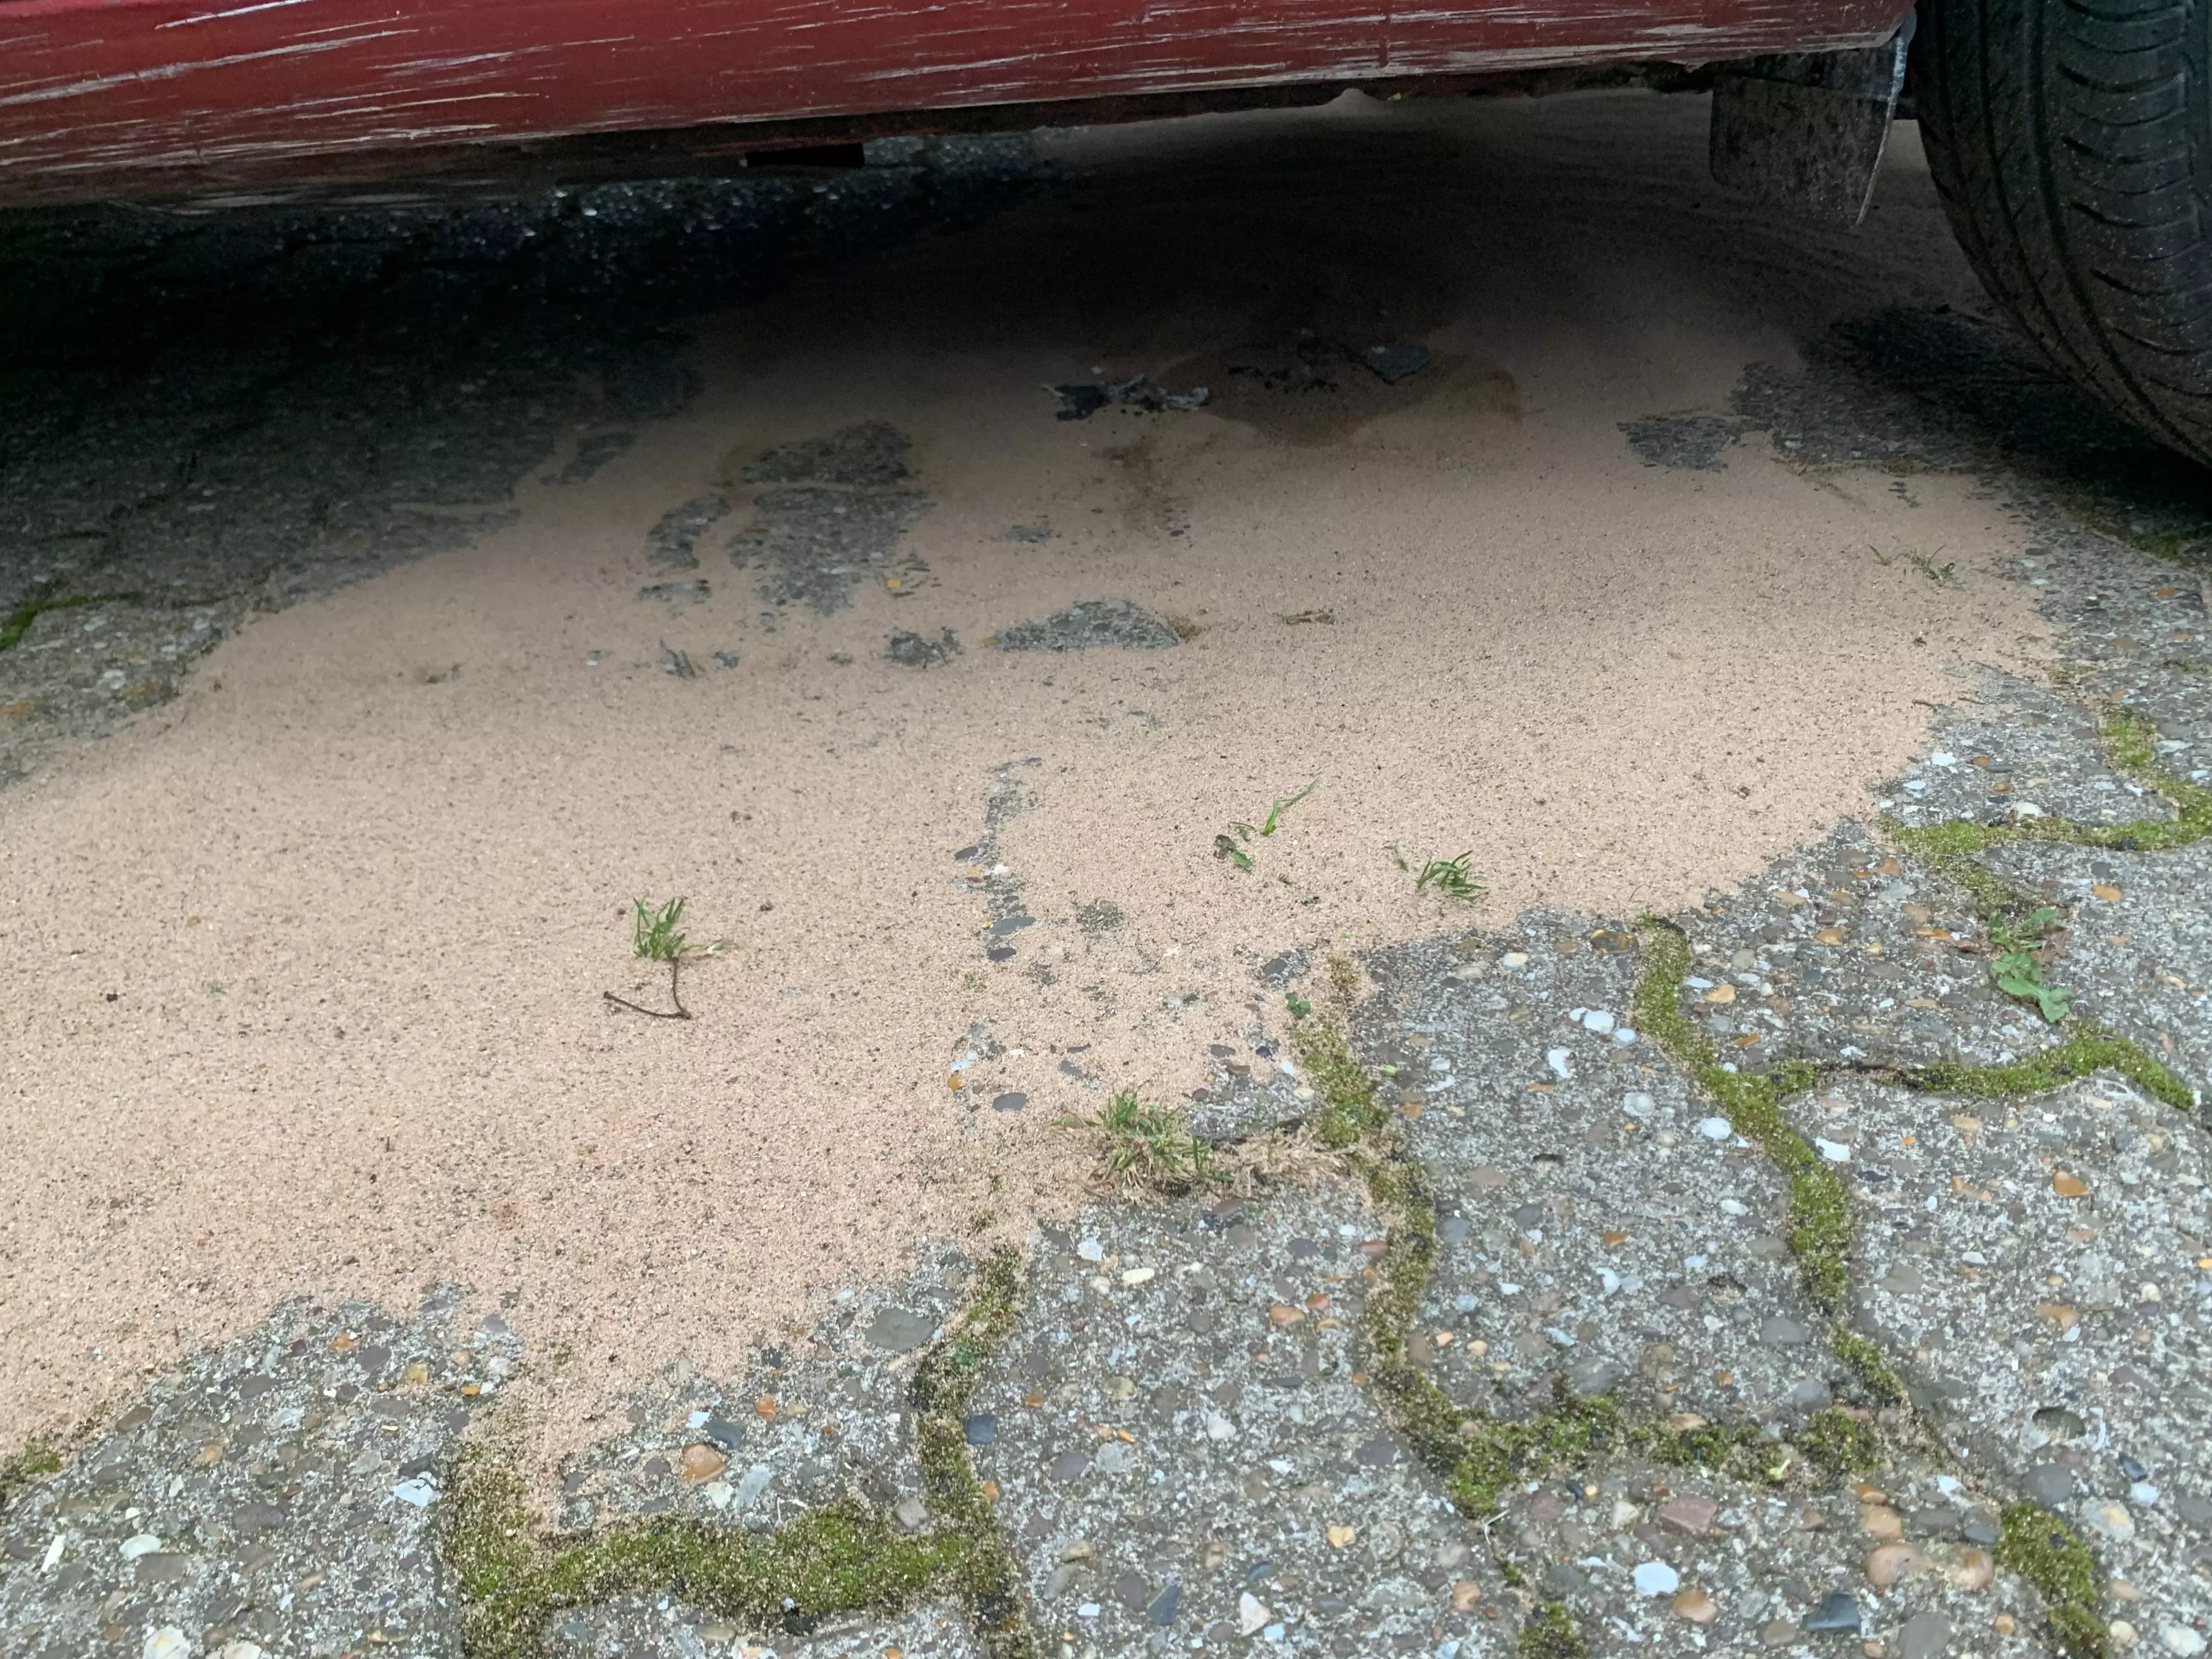 There was a puddle underneath the car.